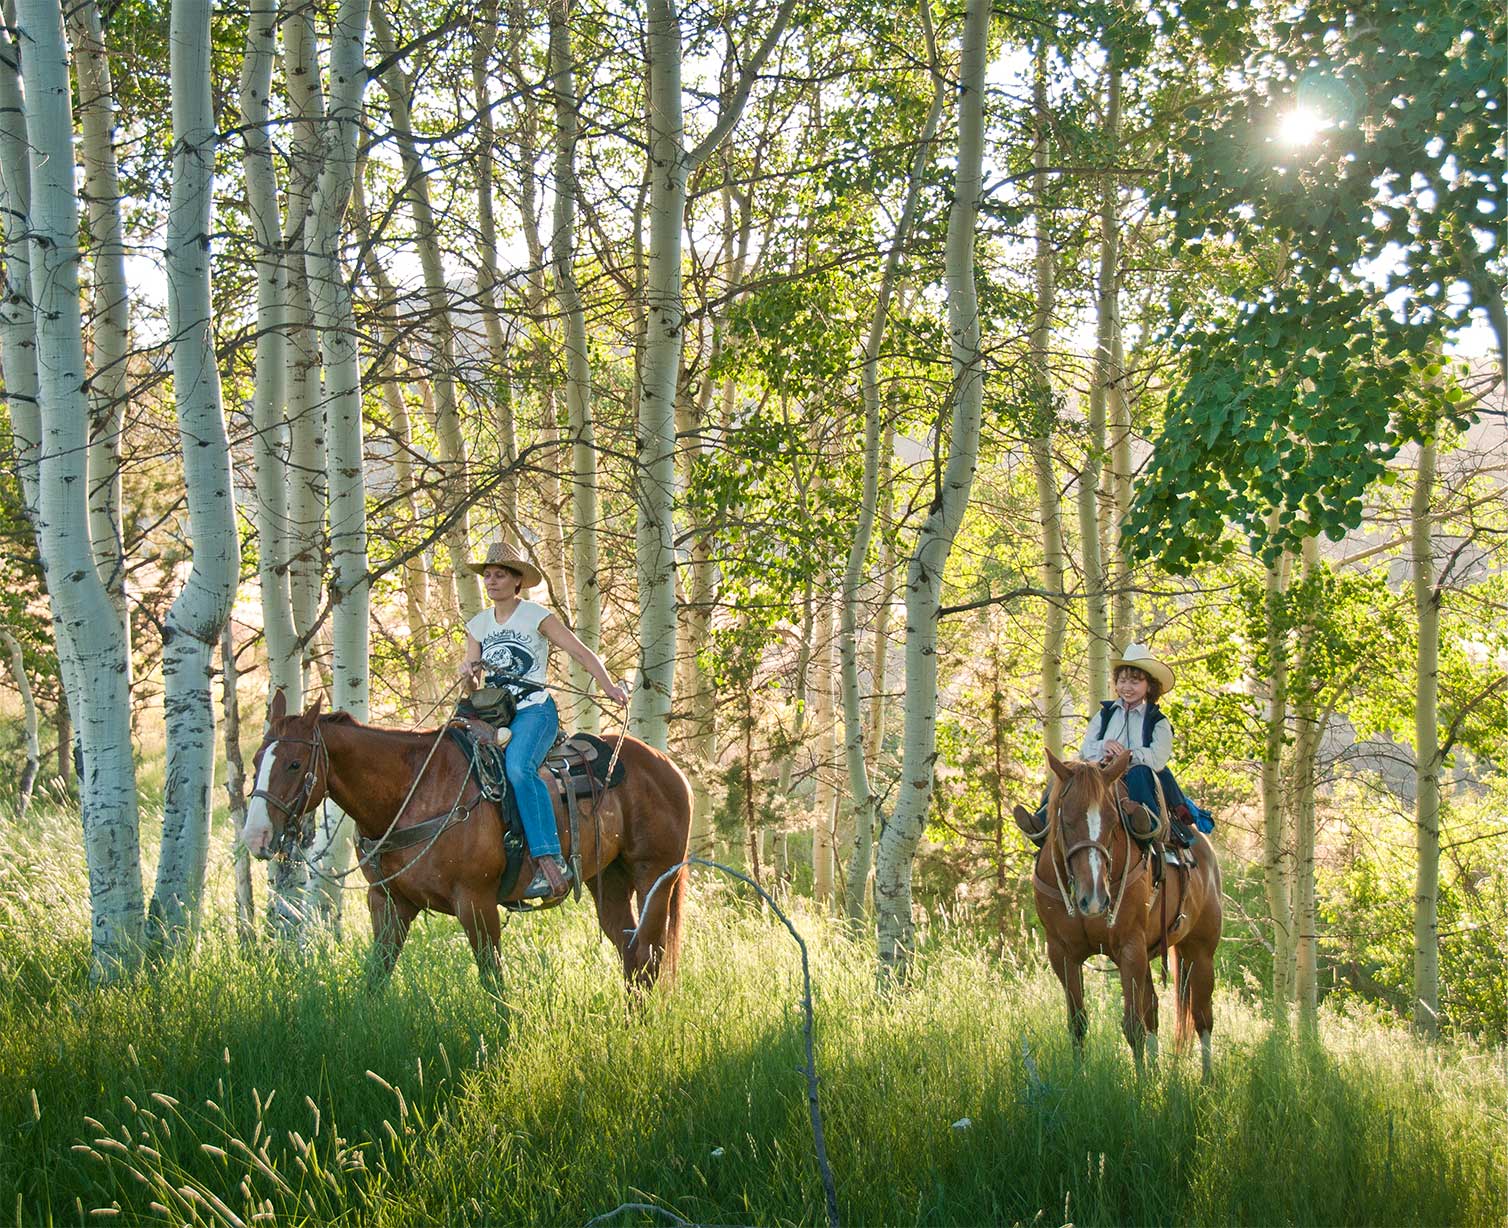 Two riders on brown horses in an aspen grove